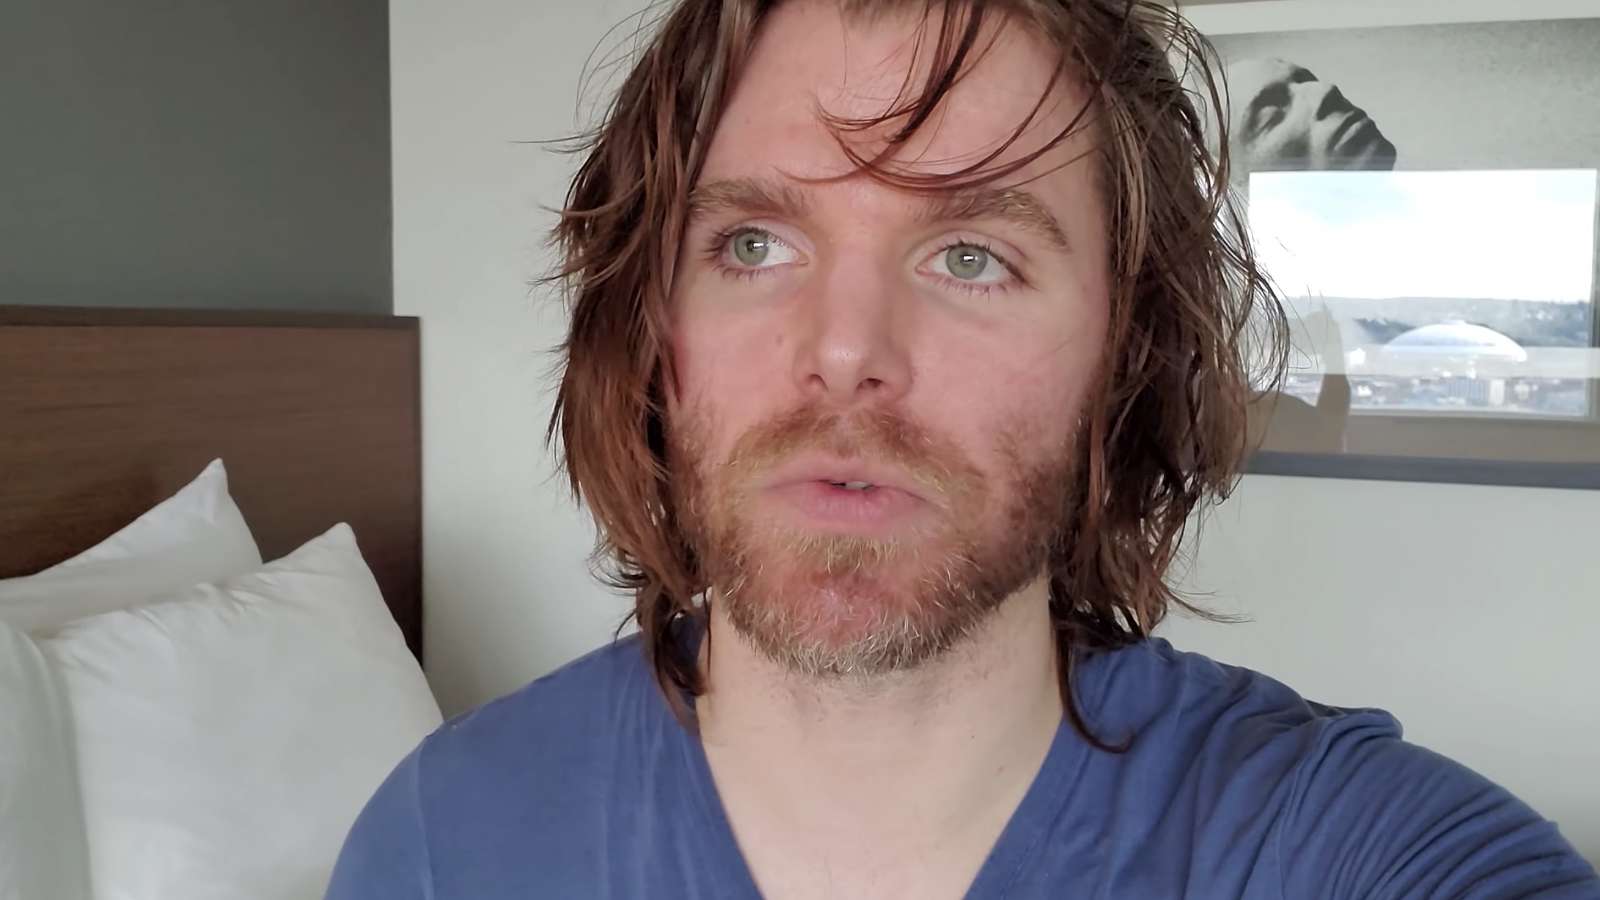 Onision talks to fans in YouTube video